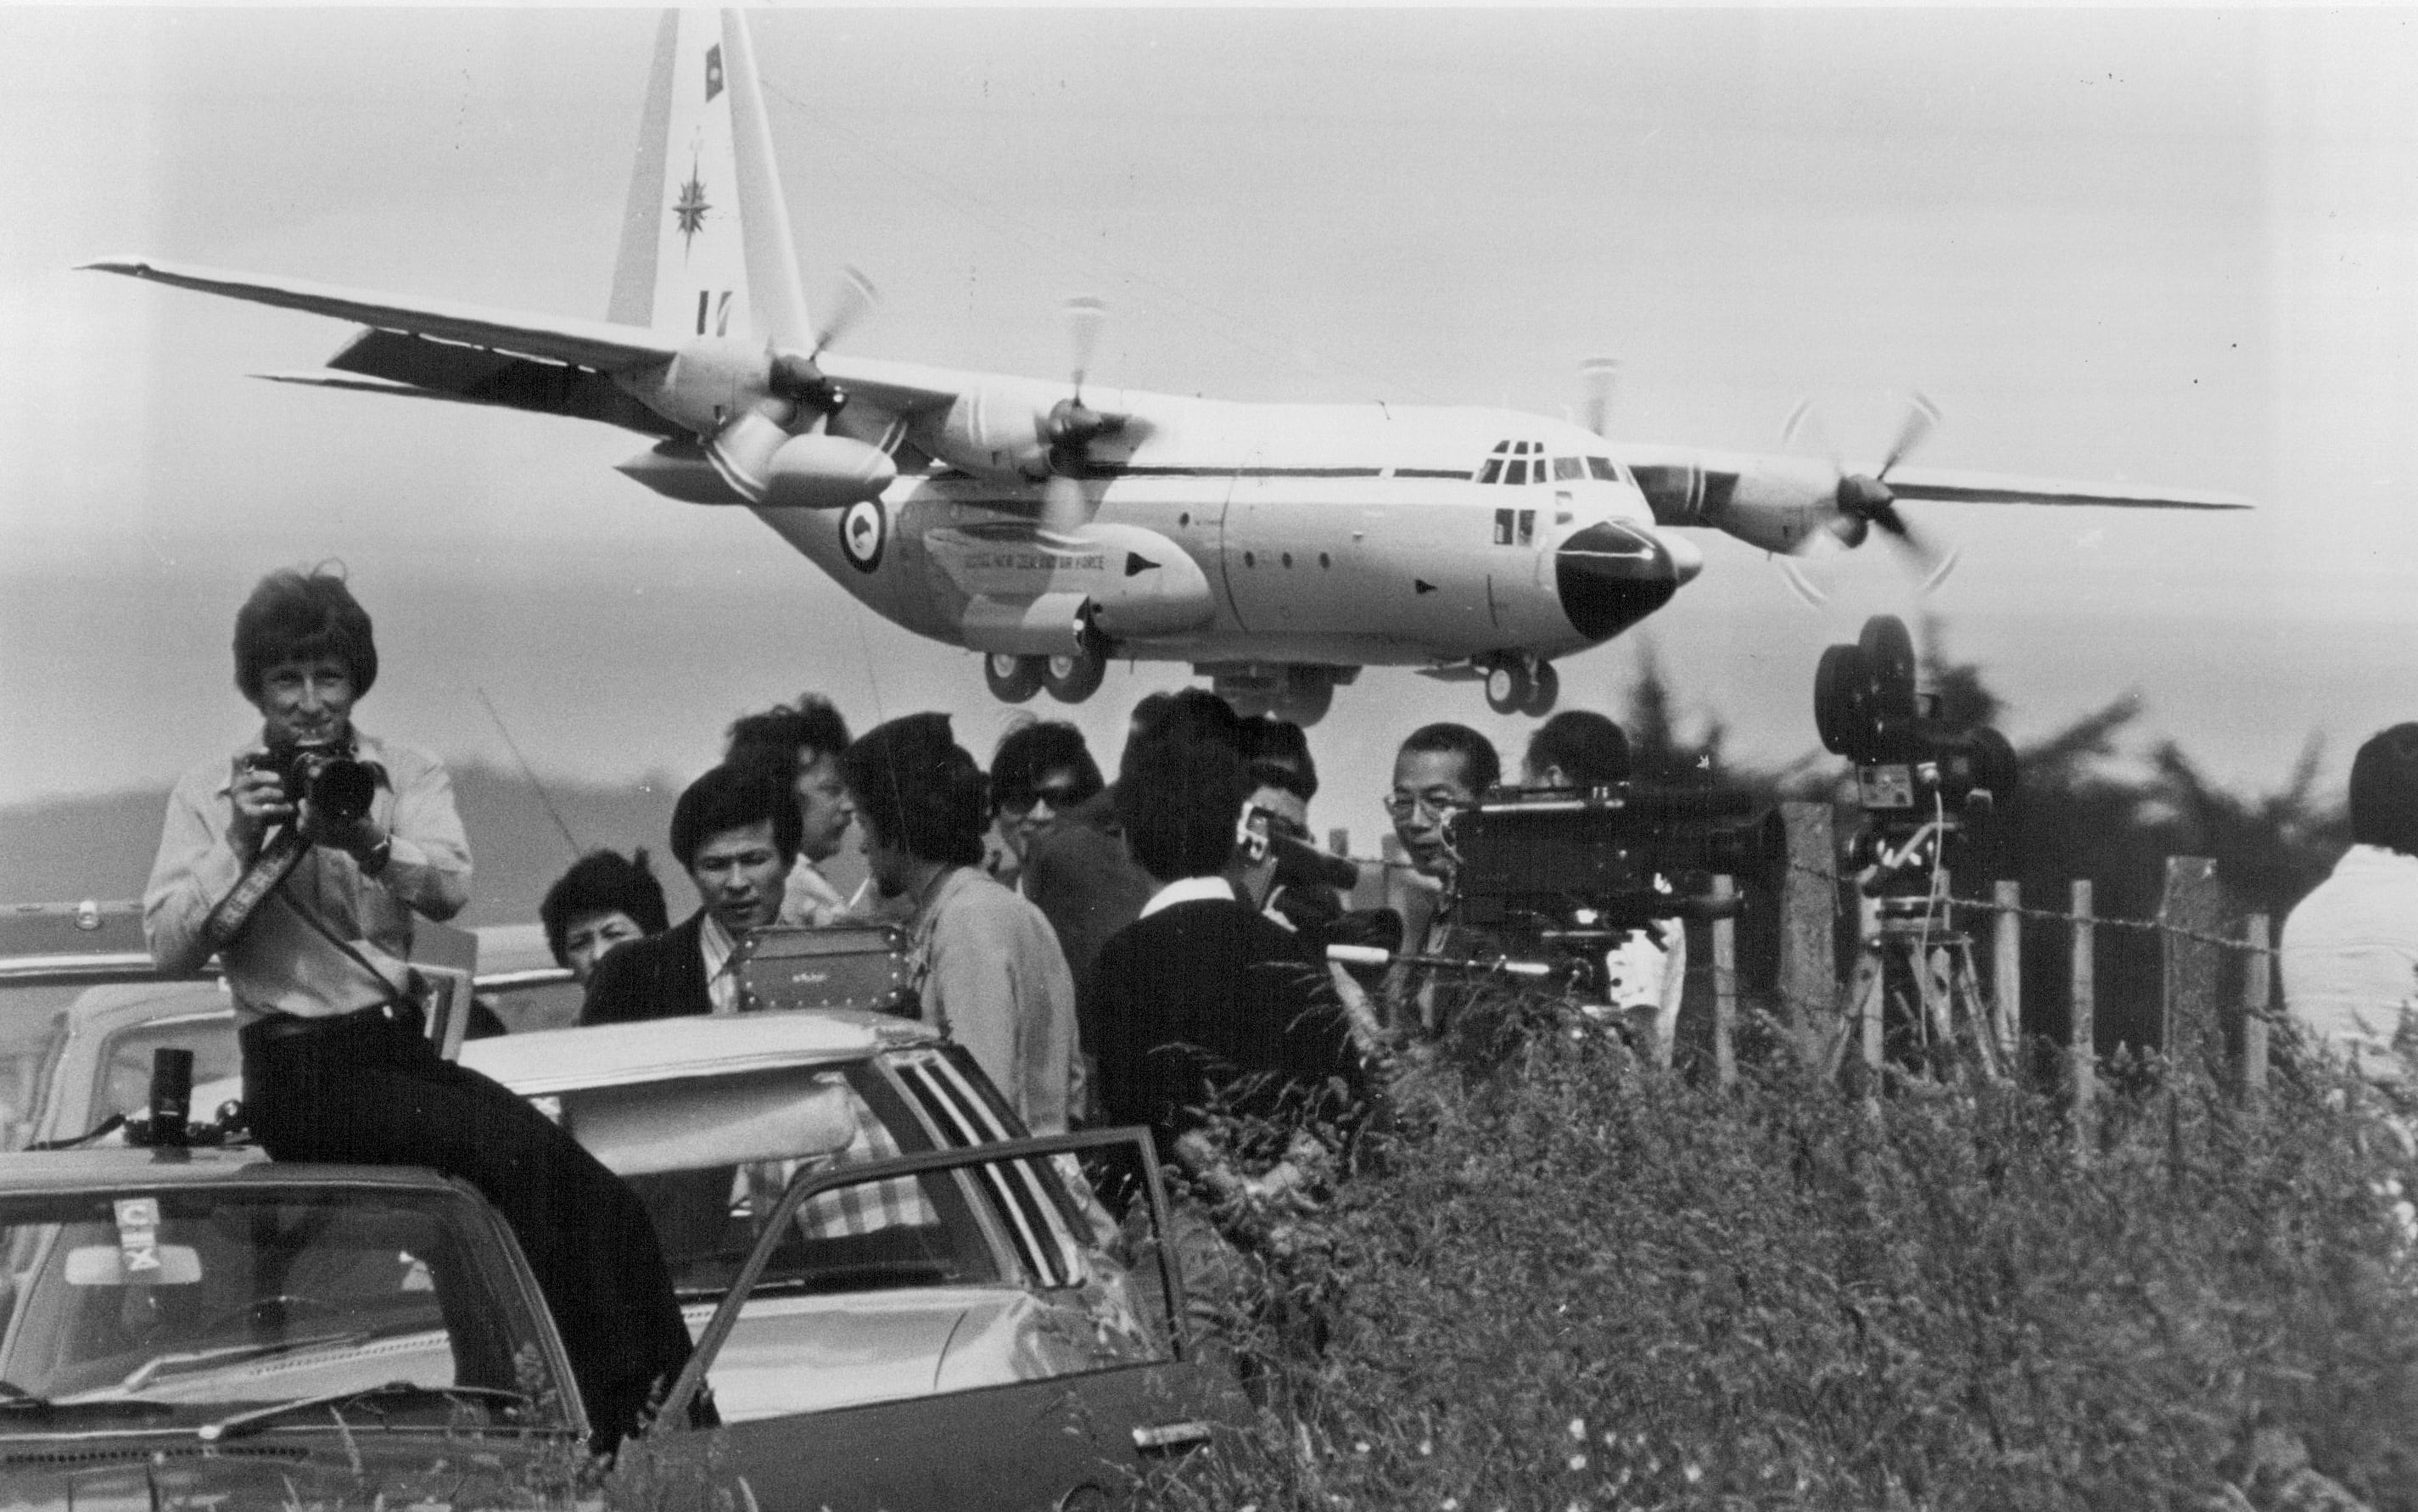 Hercules arrives at Whenuapai with the first load of bodies from the ice.